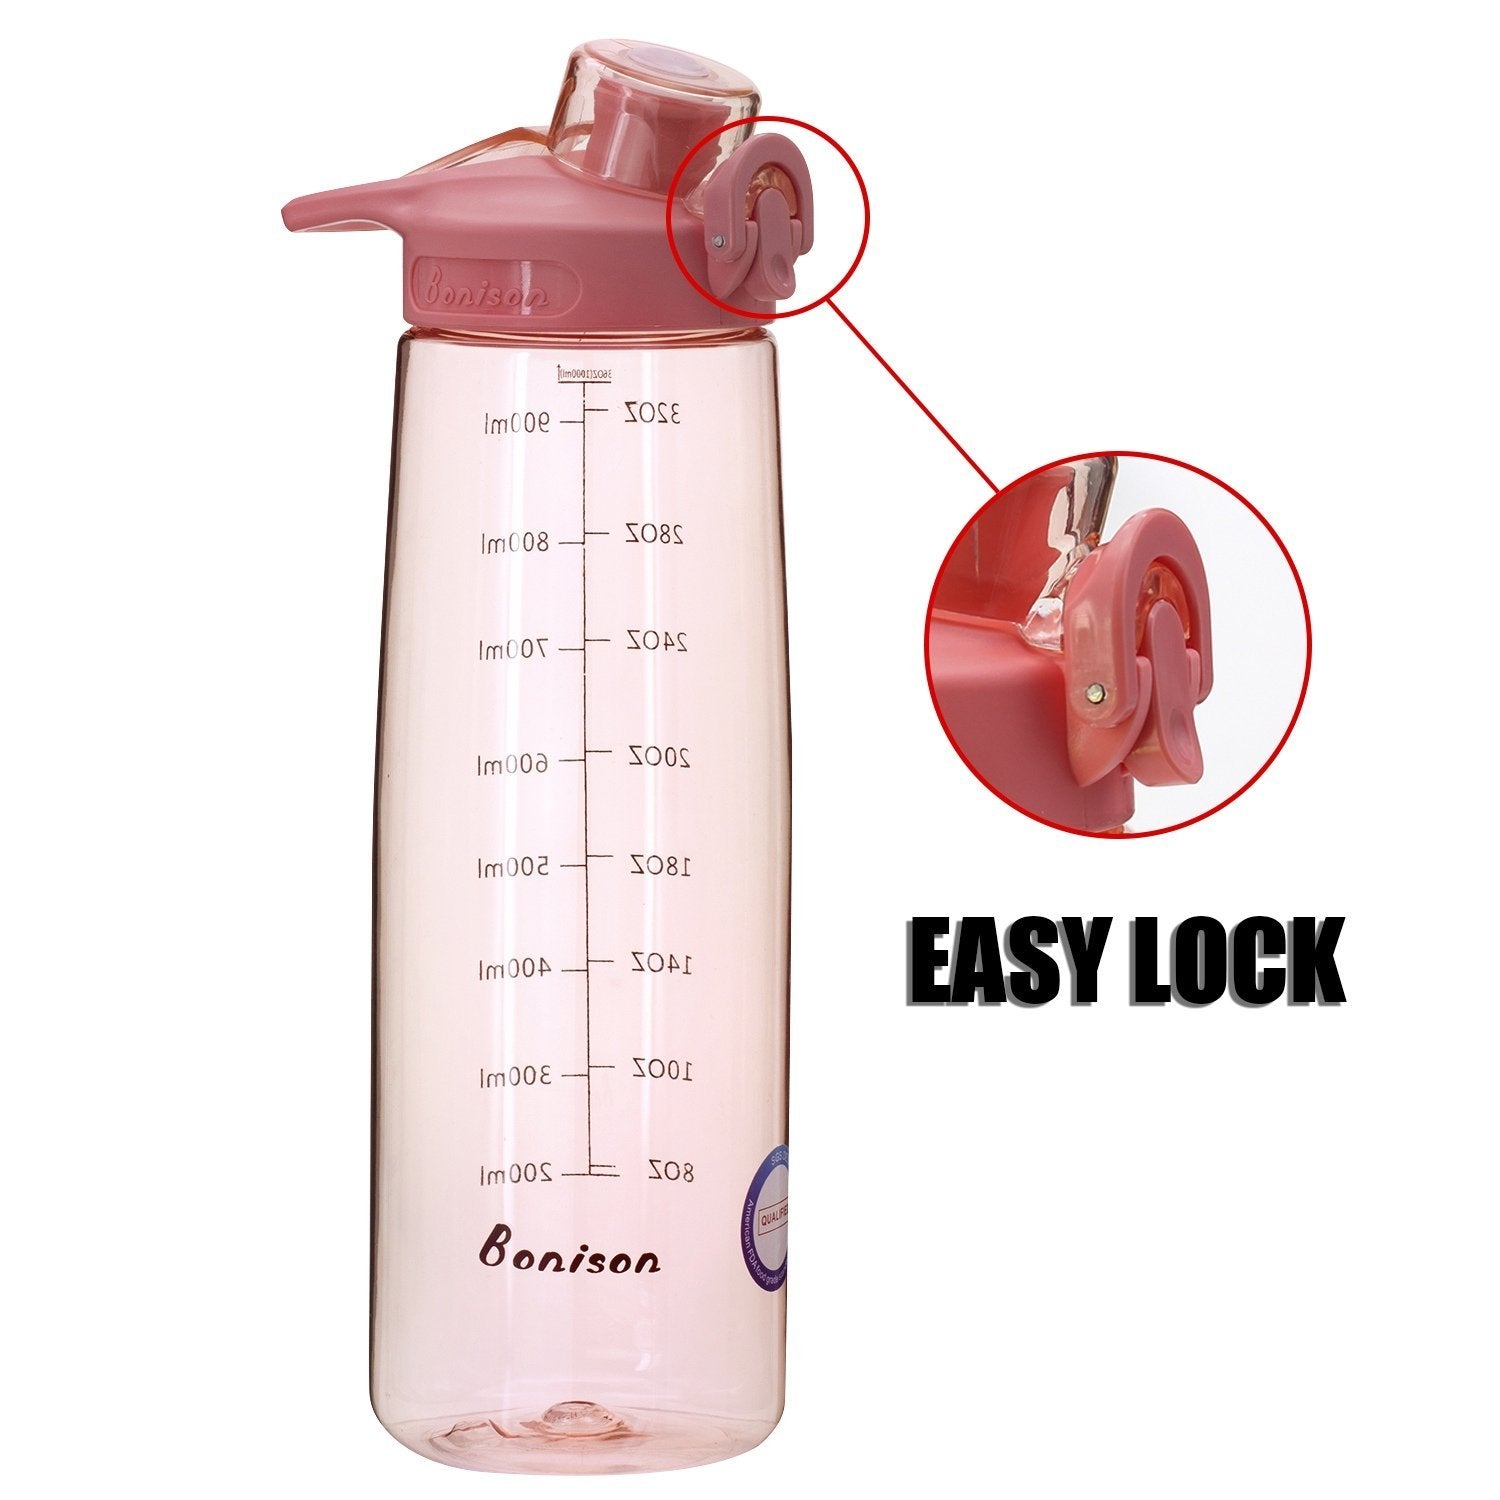 Bonison 36 OZ Sports Bottle Water With Flip Top Lid Leak Proof Bpa Free Drinking Water Bottle, for Travel Yoga Running Outdoor Cycling and Camping - Pink